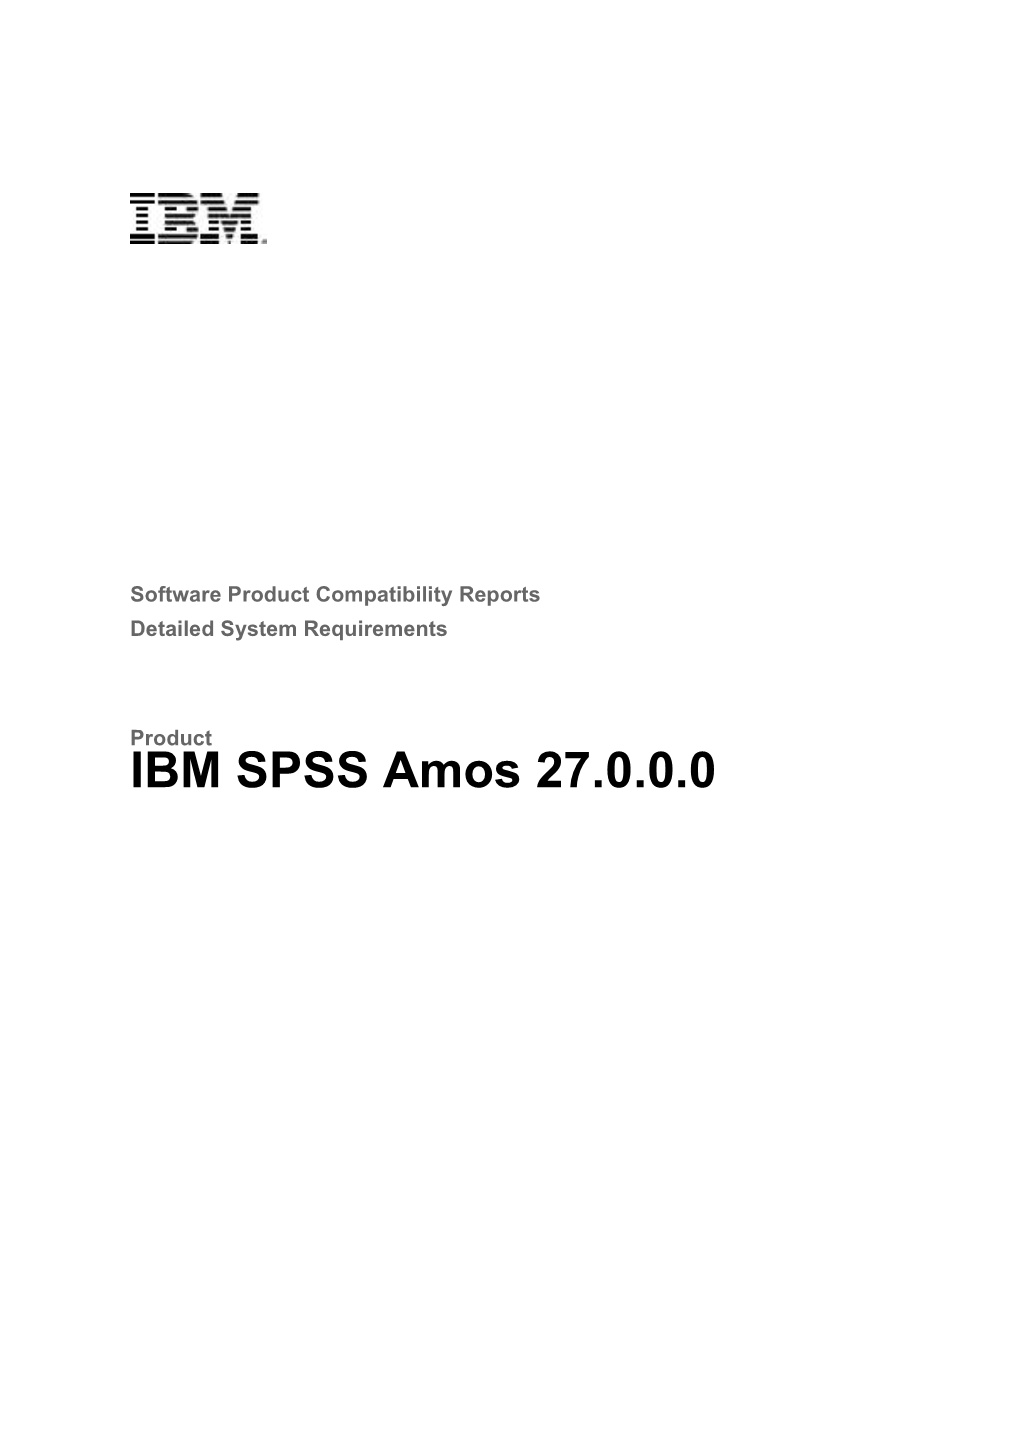 IBM SPSS Amos 27.0.0.0 IBM SPSS Amos 27.0.0.0 Detailed System Requirements